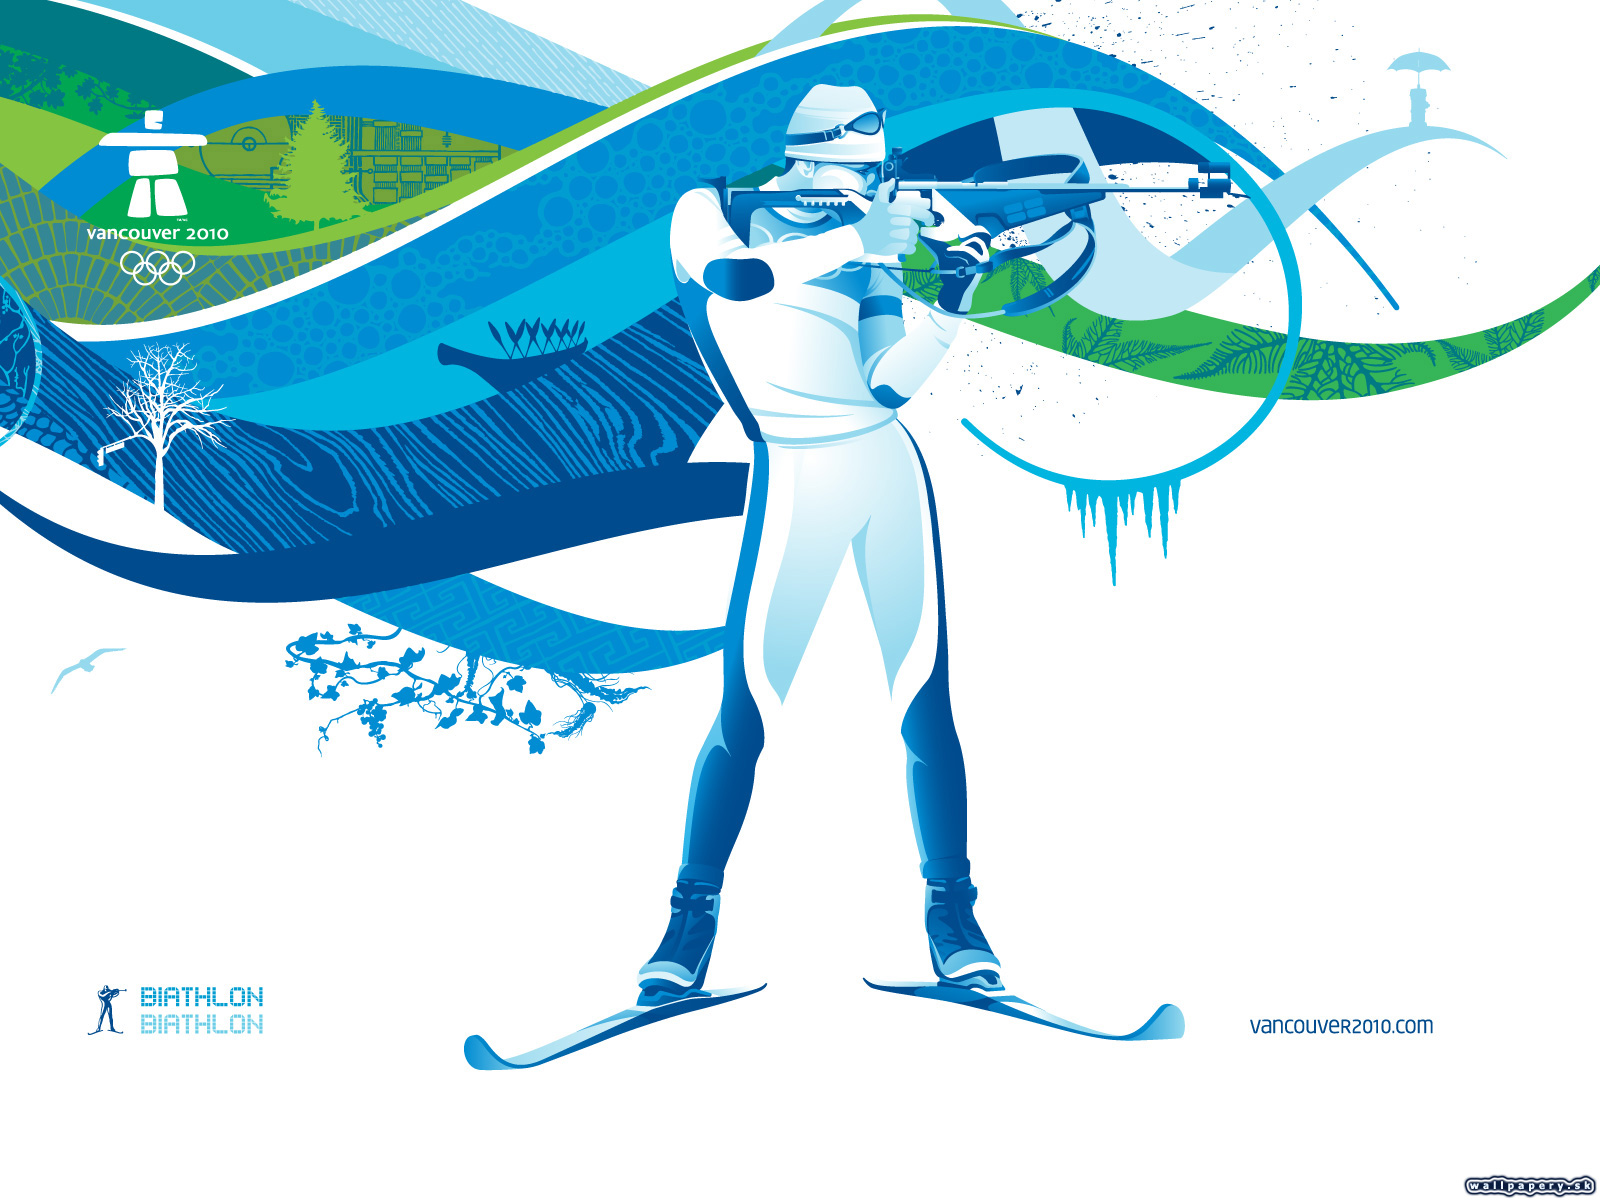 Vancouver 2010 - The Official Video Game of the Olympic Winter Games - wallpaper 24